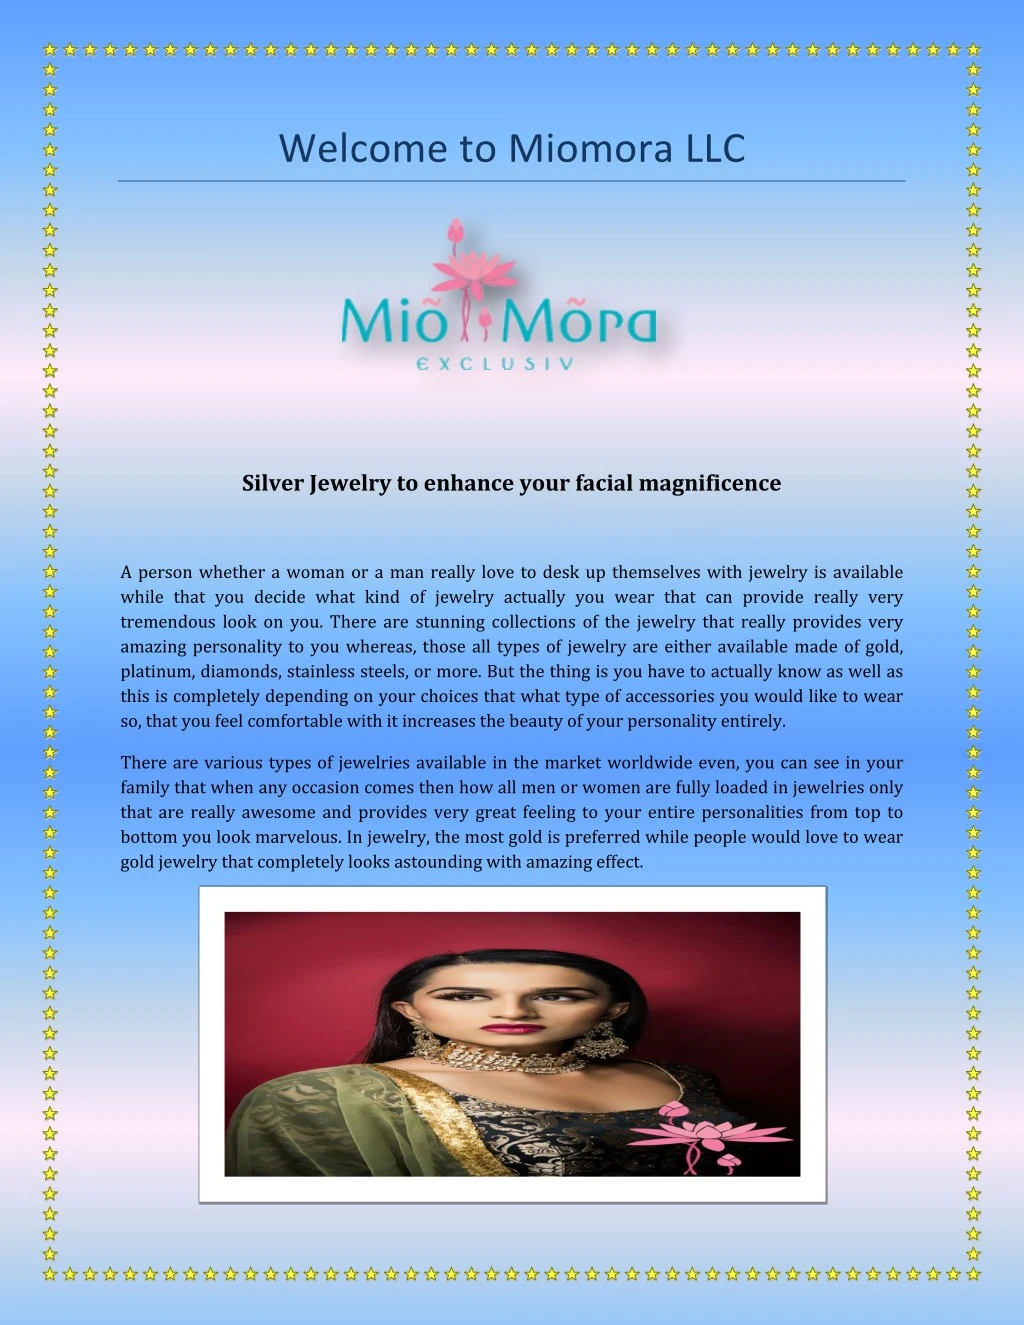 welcome to miomora llc